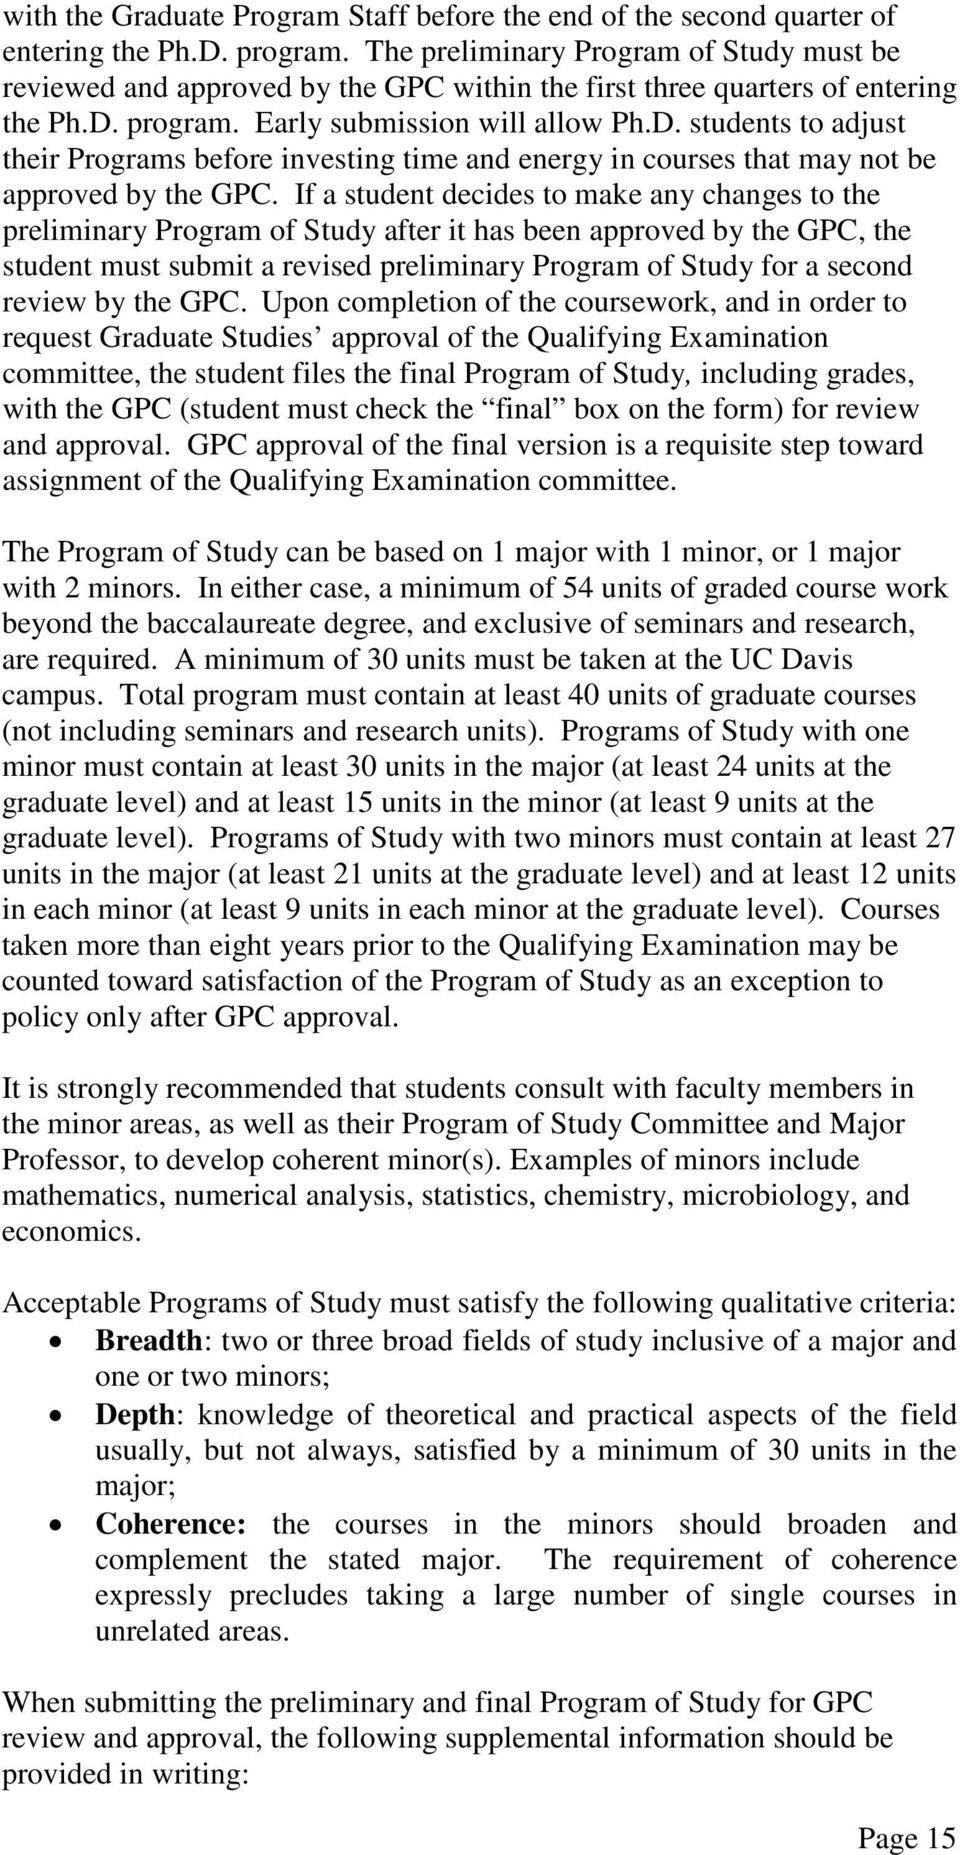 program. Early submission will allow Ph.D. students to adjust their Programs before investing time and energy in courses that may not be approved by the GPC.